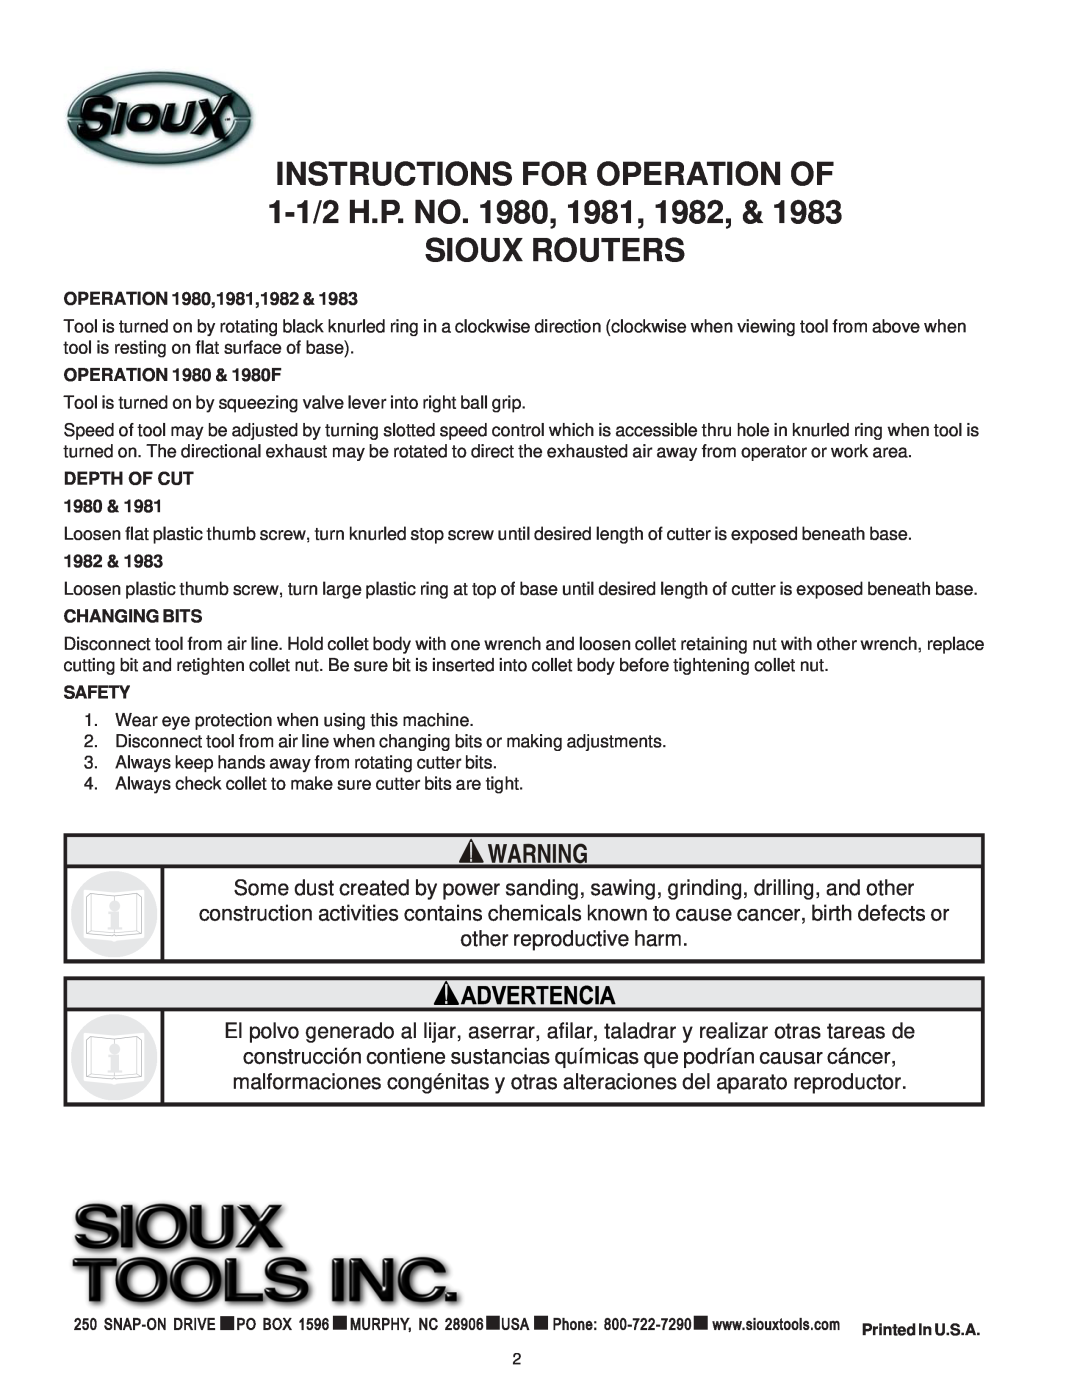 Sioux Tools 1983, 1985 manual INSTRUCTIONS FOR OPERATION OF 1-1/2 H.P. NO. 1980, 1981, 1982, Sioux Routers 